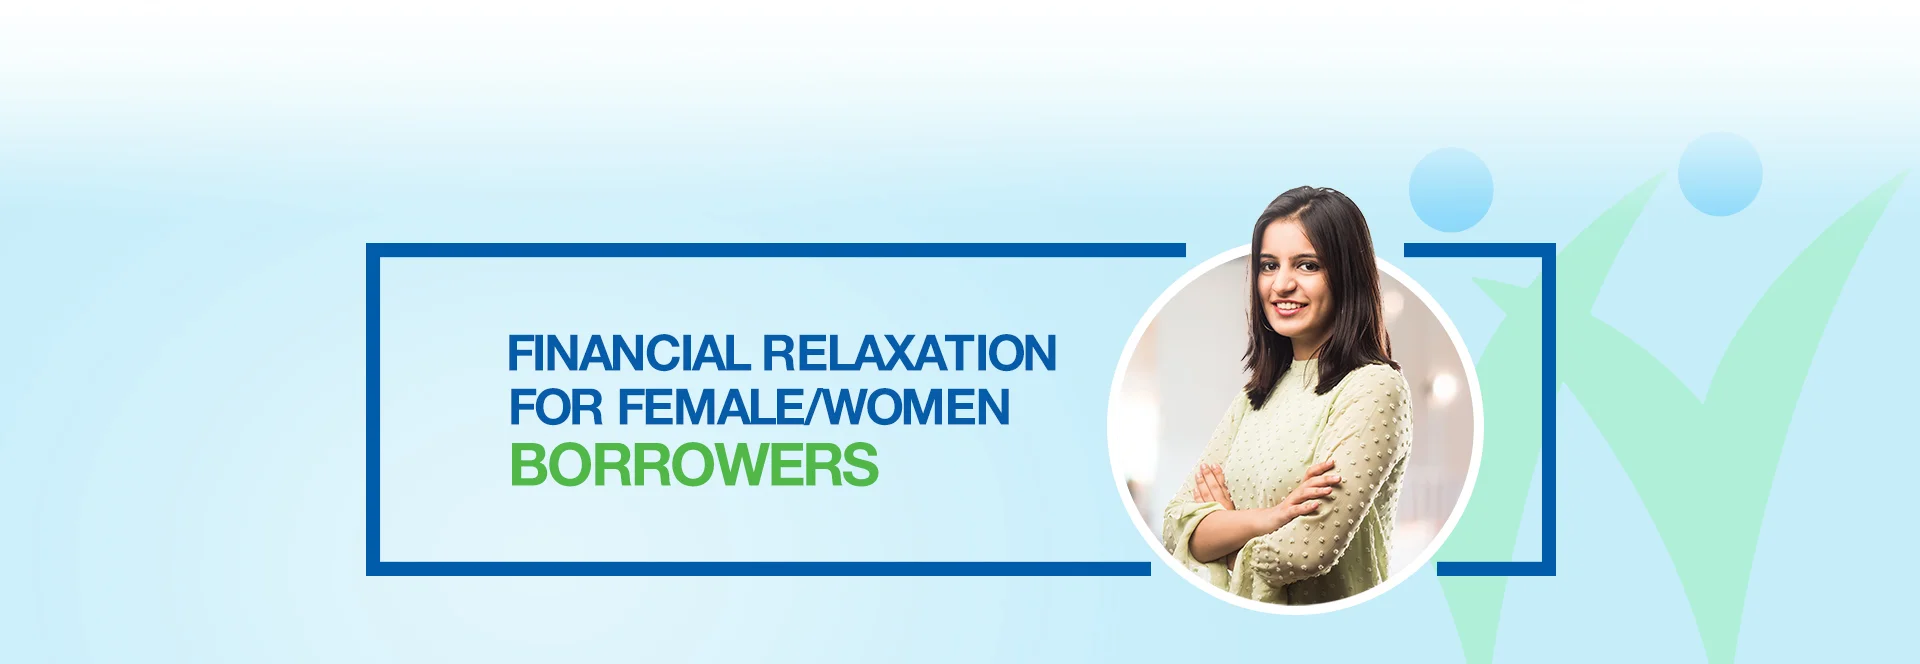 Financing Relaxation for Female/Women borrowers